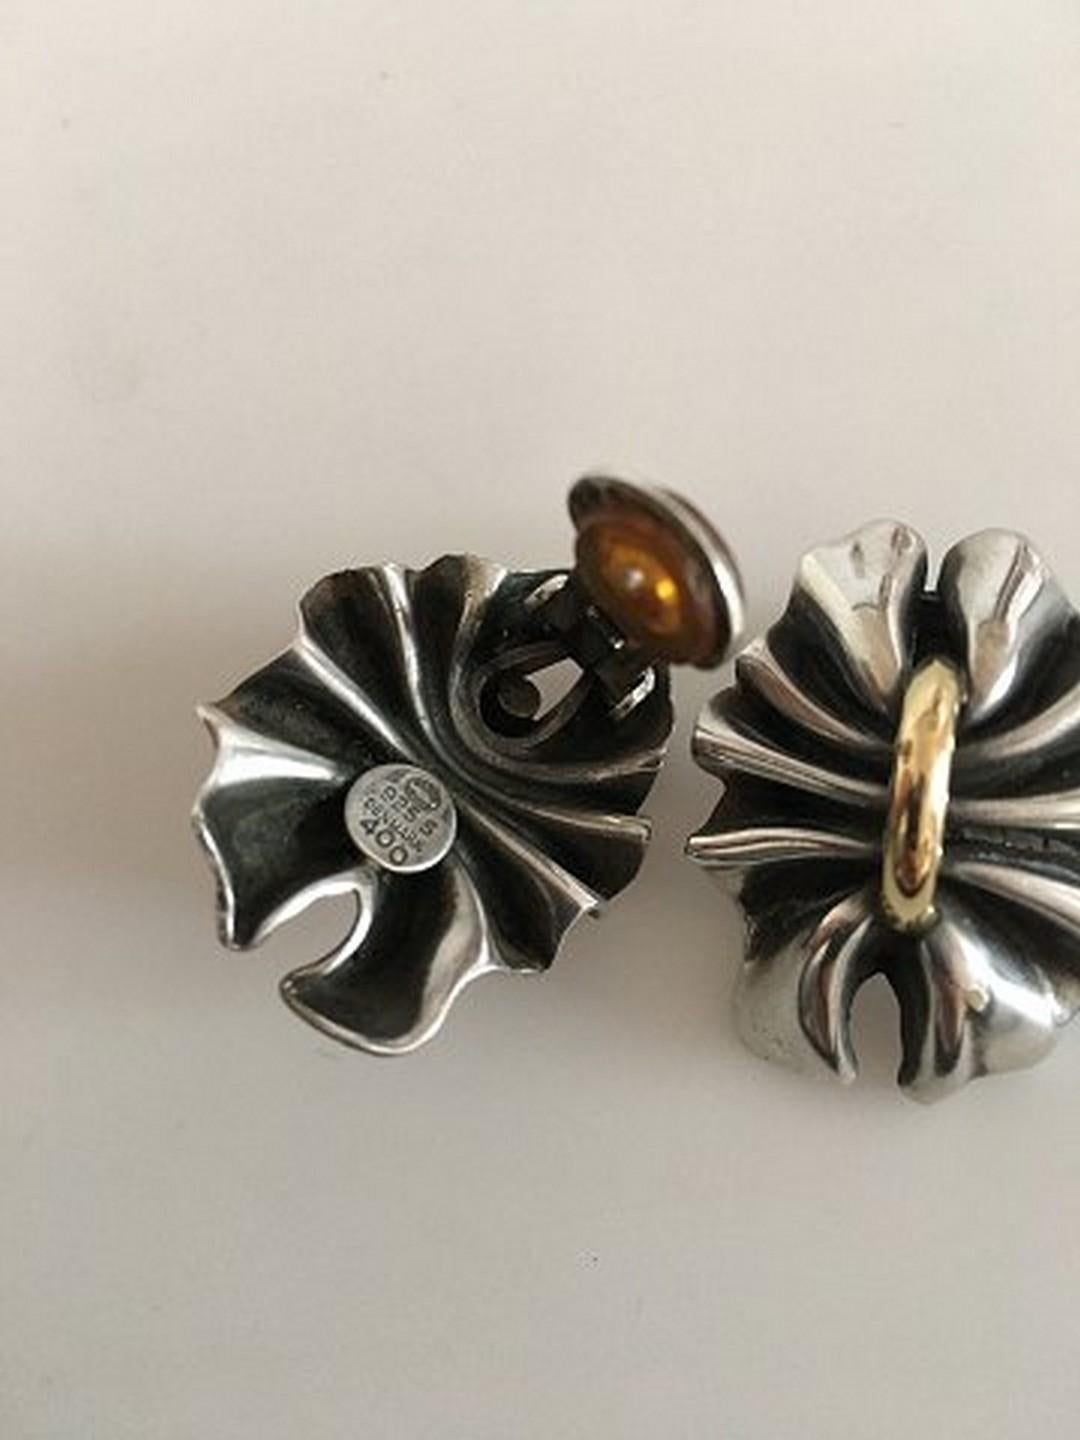 Georg Jensen Sterling Silver and 18K Gold Lene Munthe Earrings (Clips) No 400. Measures 3 cm / 1 3/16 in. x 2 cm / 0 25/32 in. Combined weight of 27.3 g / 0.96 oz.